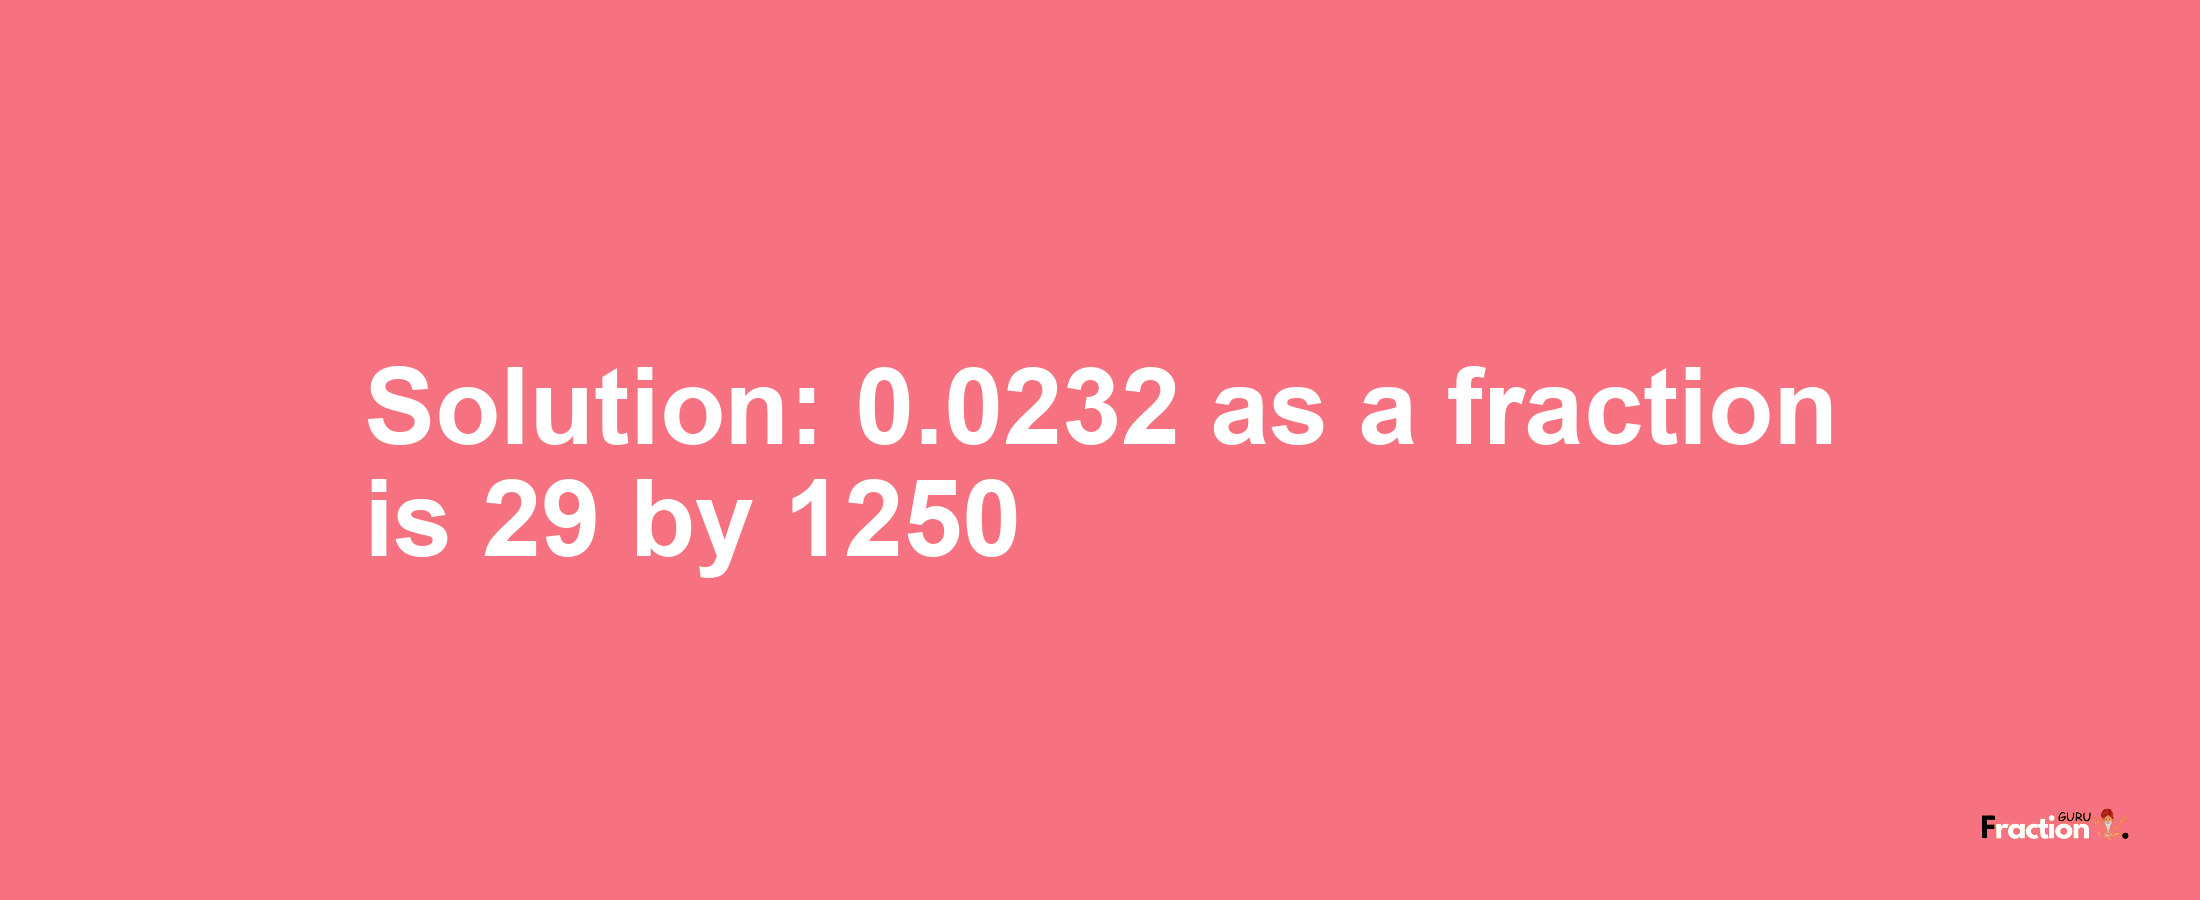 Solution:0.0232 as a fraction is 29/1250